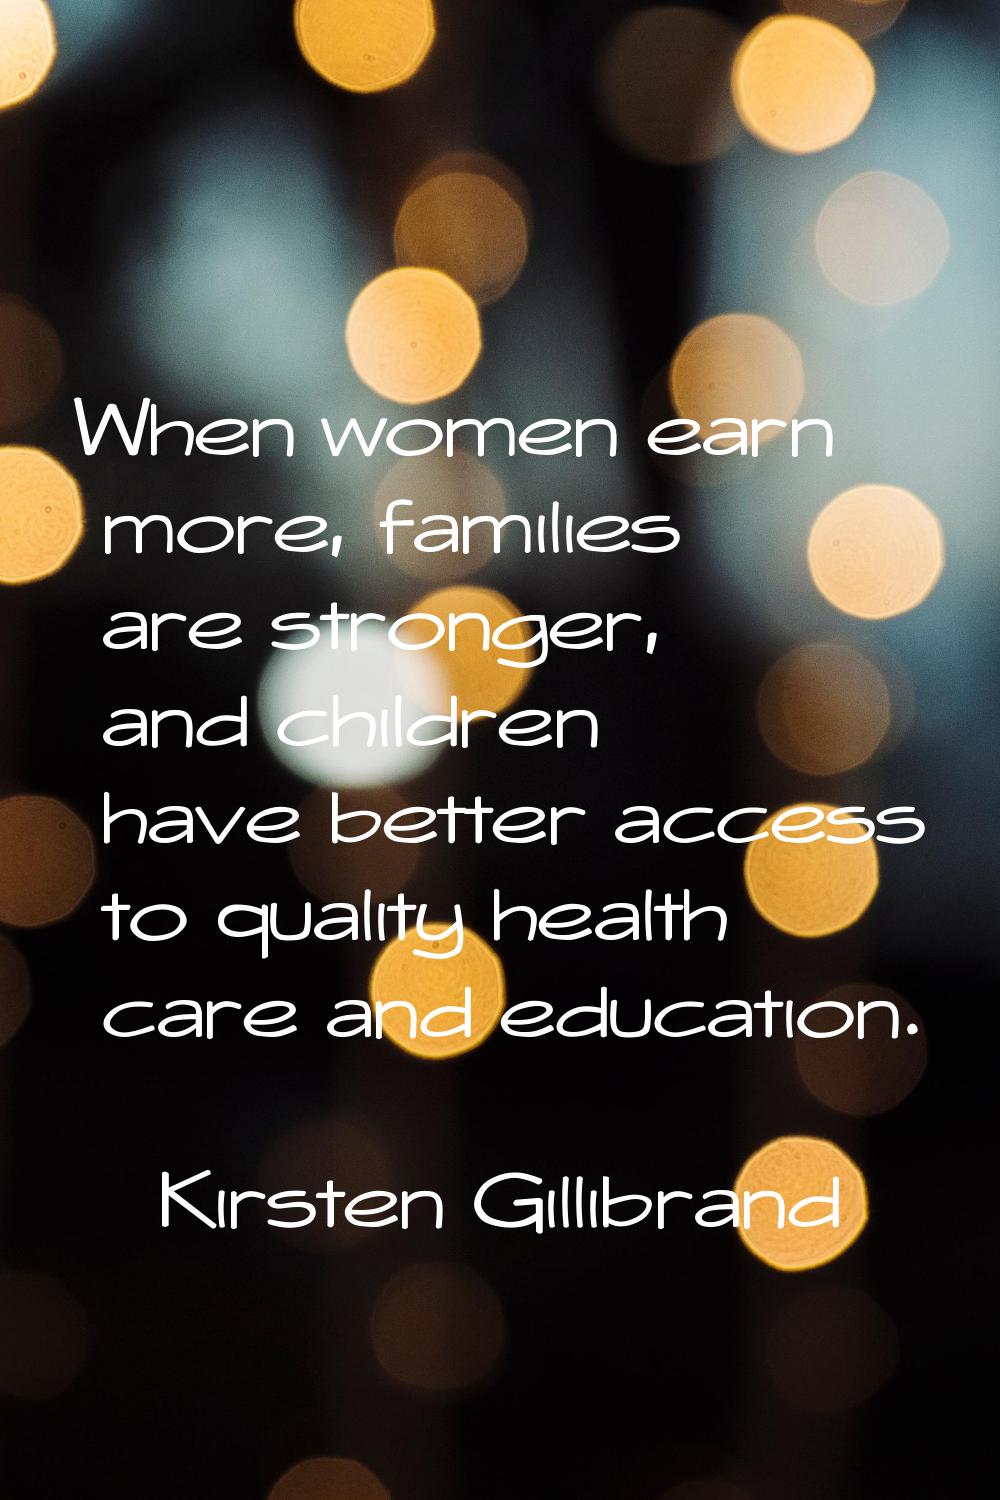 When women earn more, families are stronger, and children have better access to quality health care